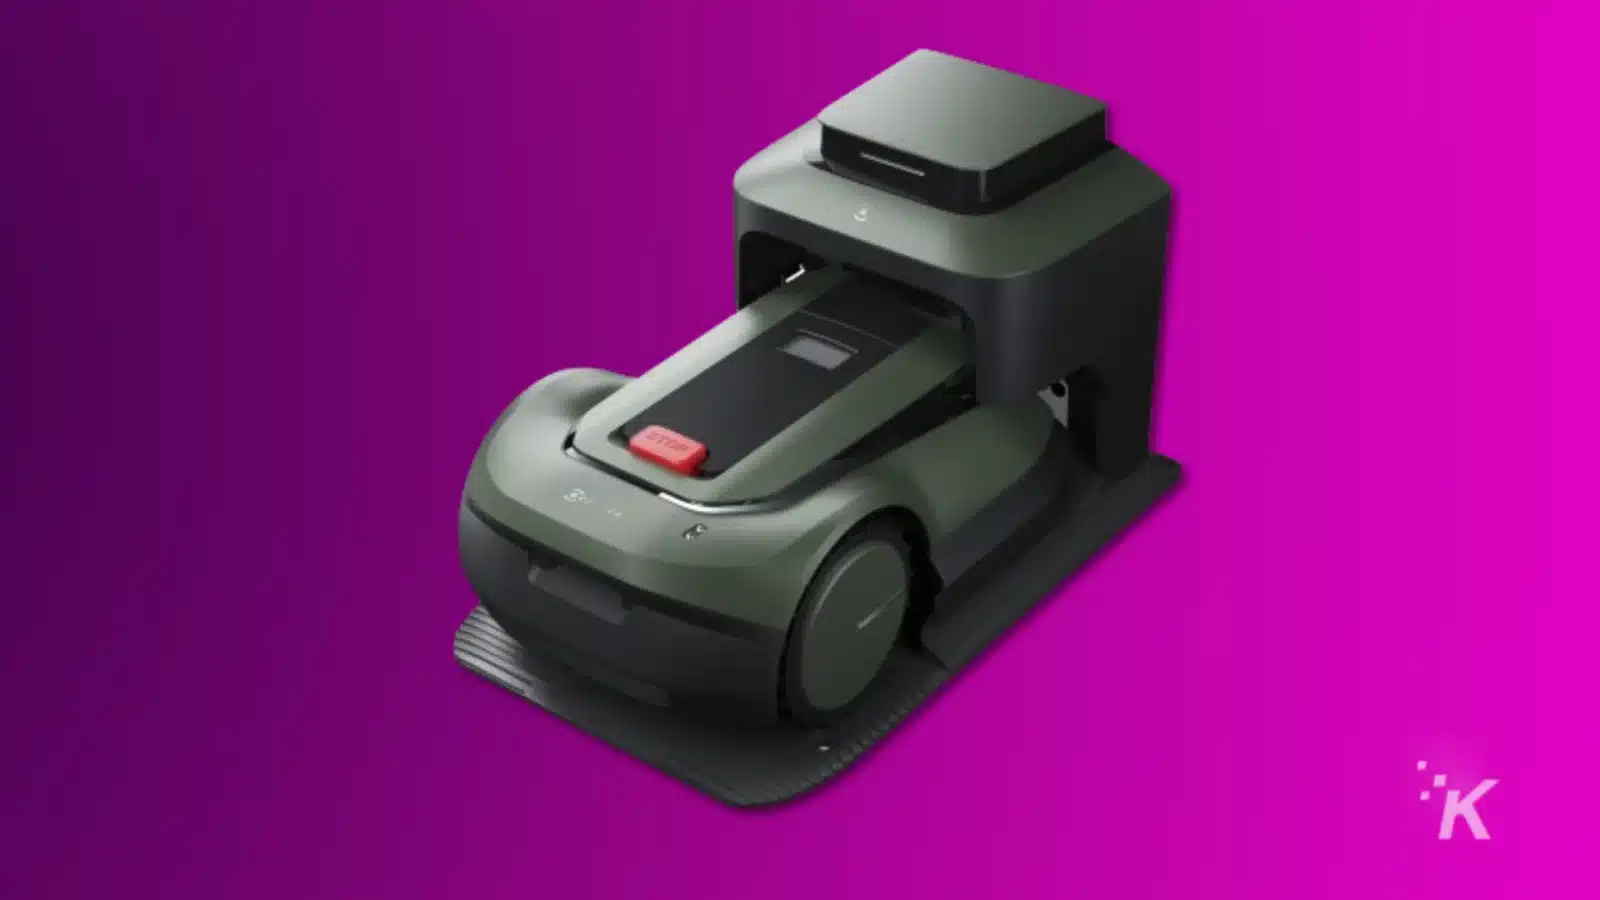 render of ecovacs goat gx 600 on a purple background